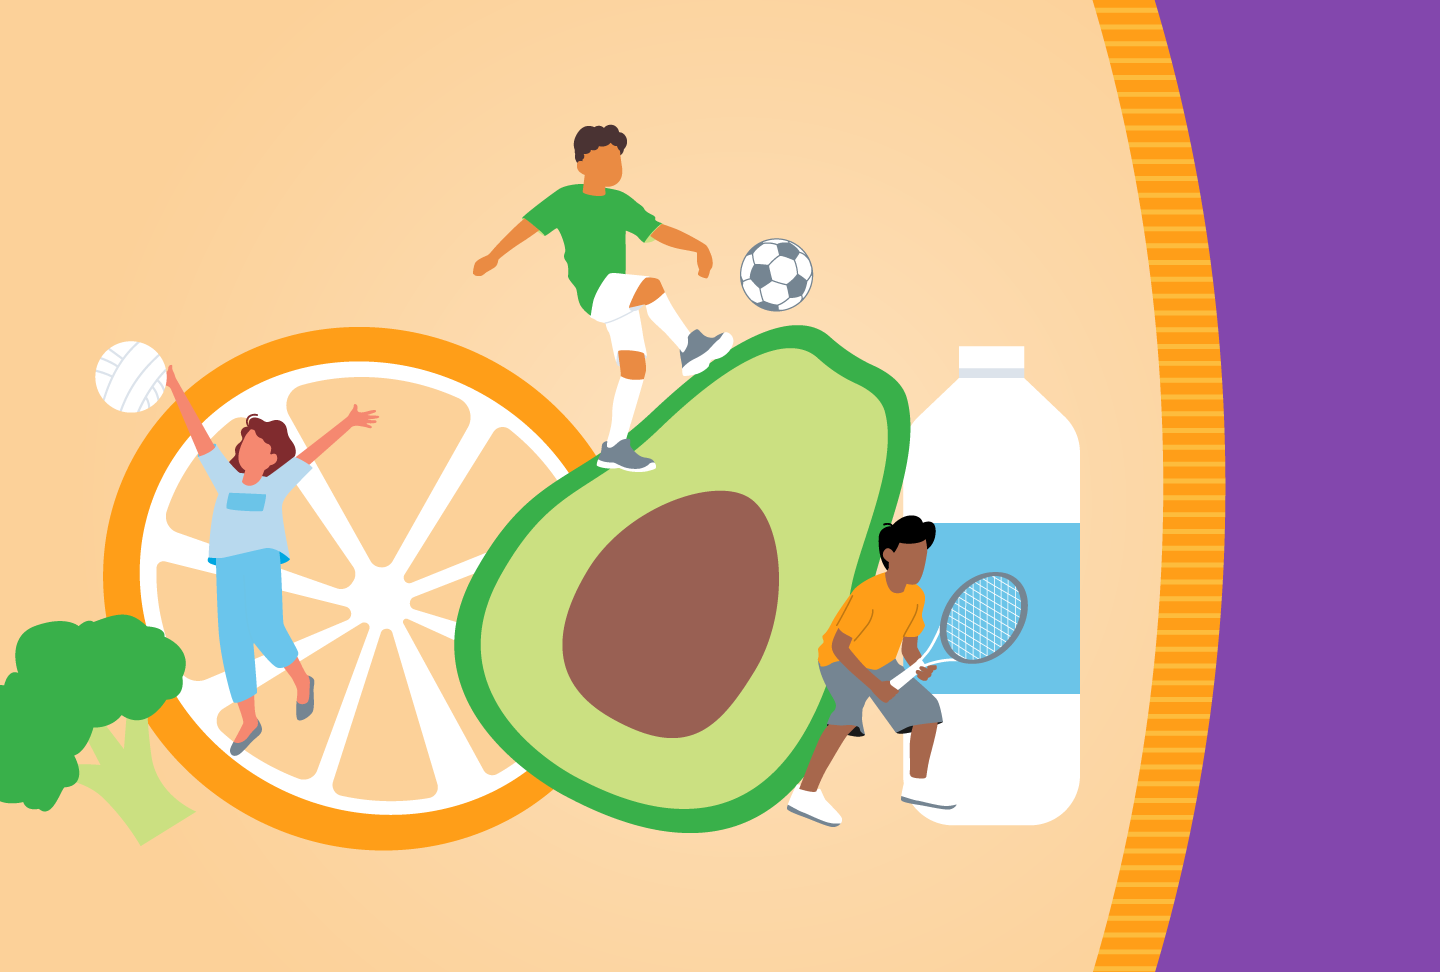 Illustration of children playing sports surrounded by fruits and vegetables, water bottle